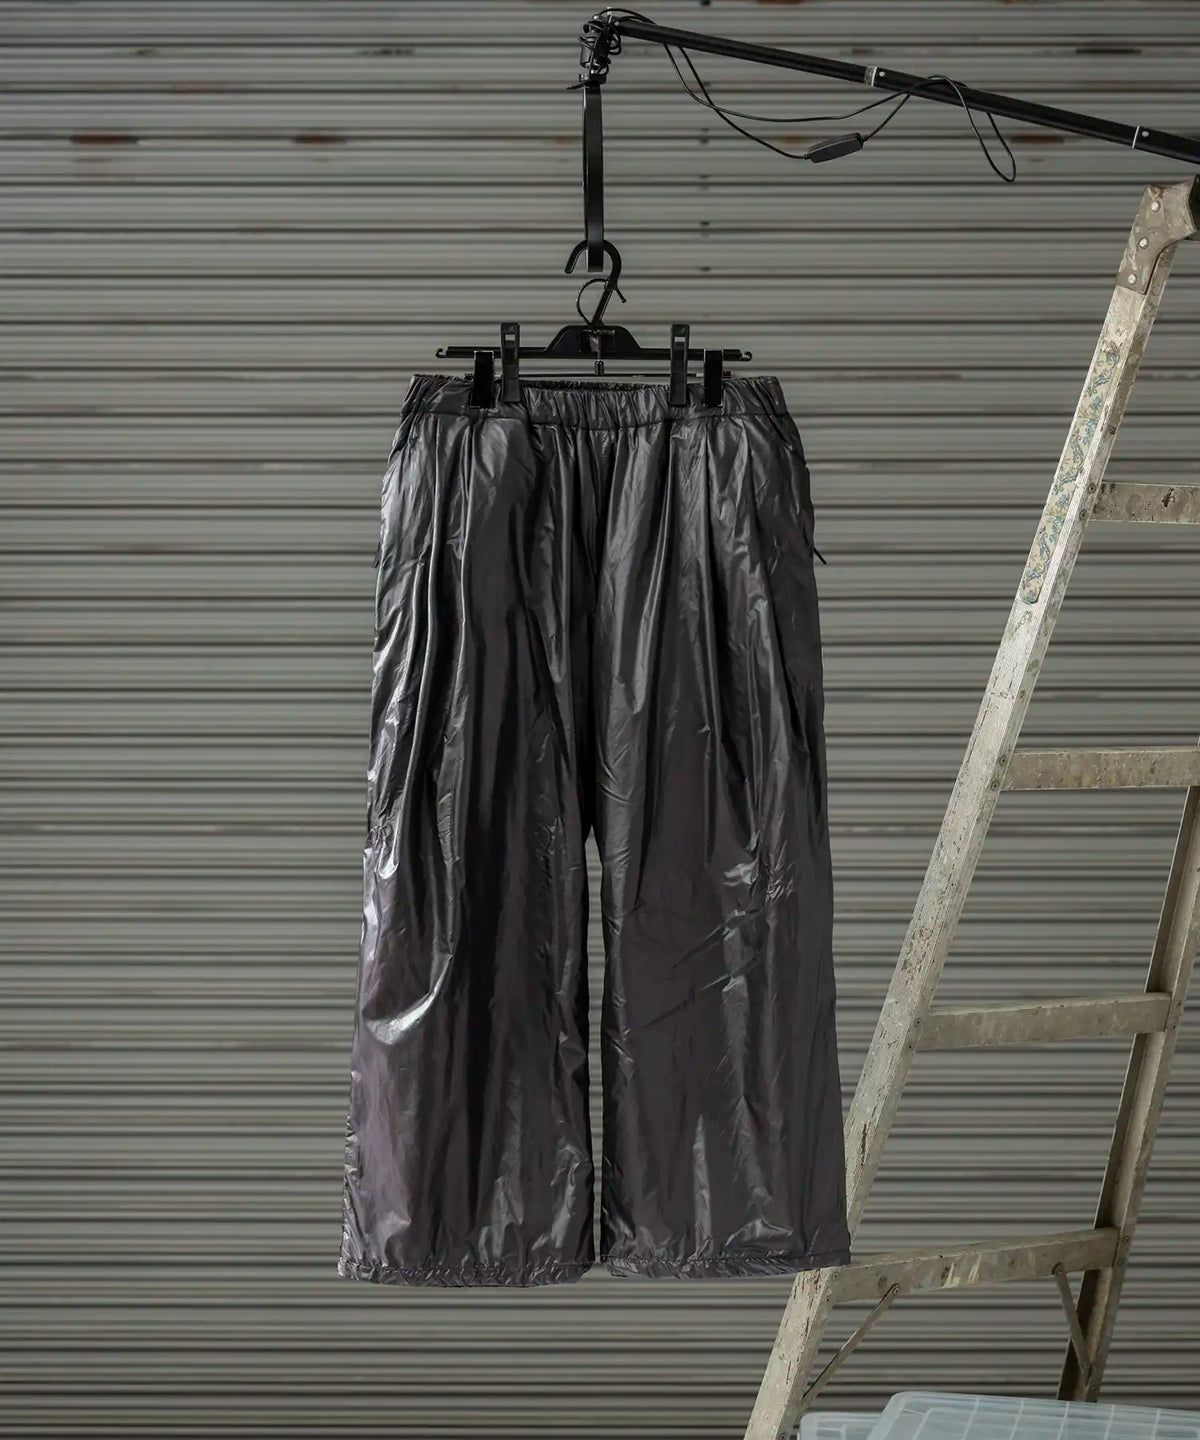 【MENS】Insulated air wide pants / Brilliance shade down proof 2023年11月中旬お届け